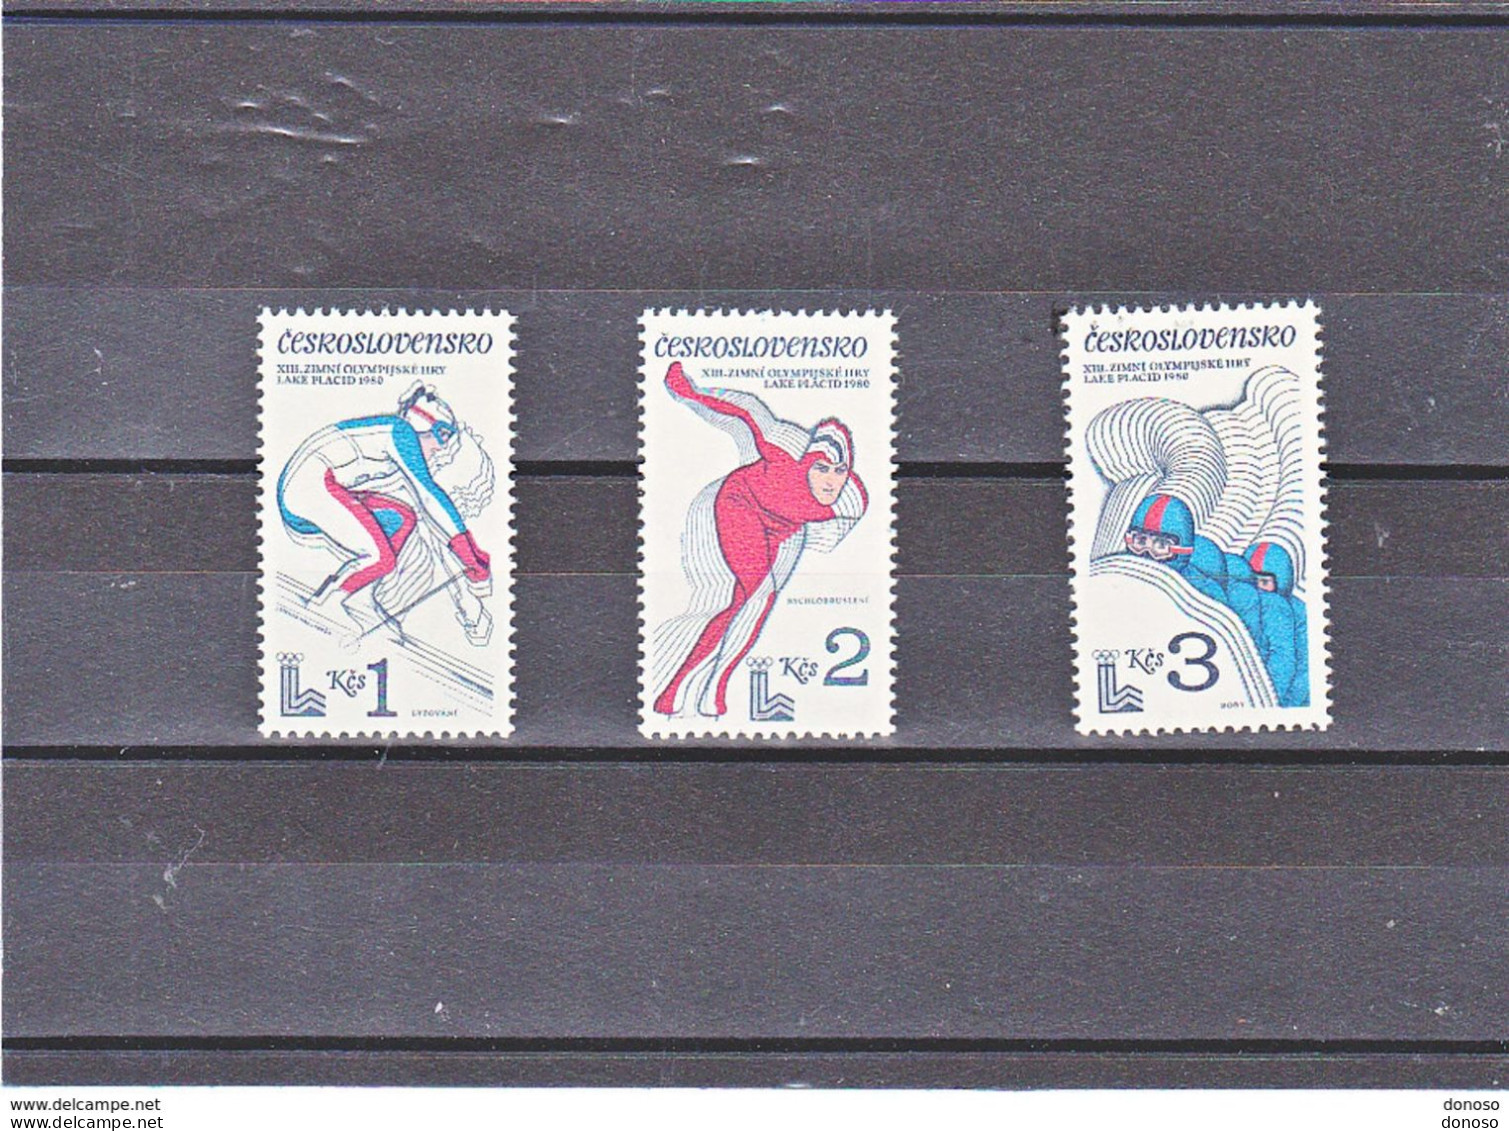 TCHECOSLOVAQUIE 1980 Jeux Olympiques De Lake Placid, Ski, Patinage, Bobsleigh Yvert 2368-2370 NEUF** MNH Cote 4,20 Euros - Unused Stamps